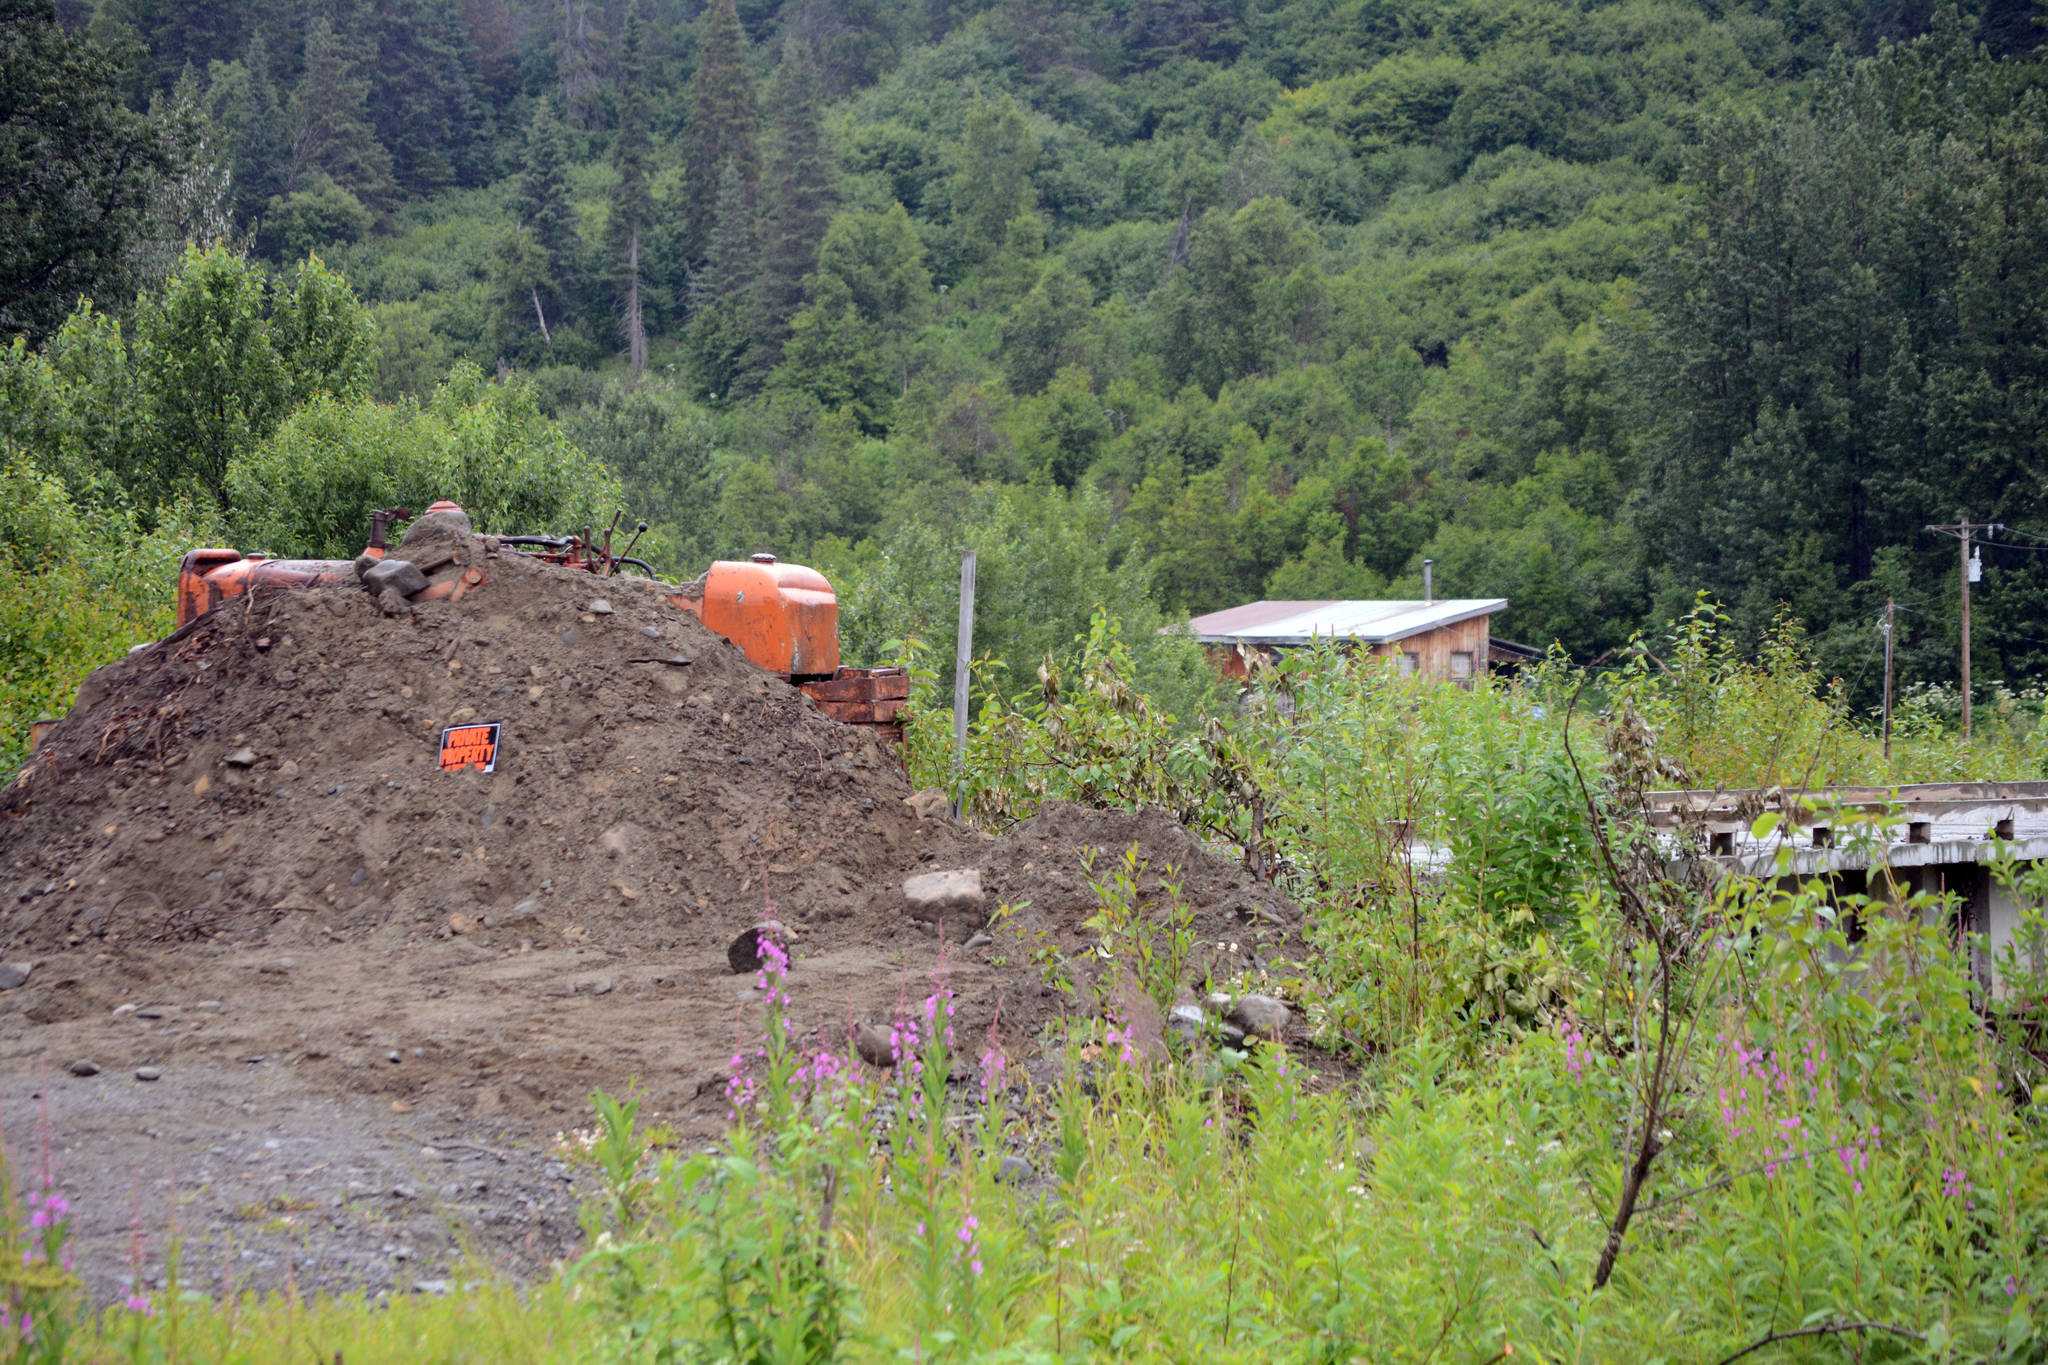 A bulldozer and a pile of gravel block the entrance to a bridge leading to the Glanville homestead on July 23, 2018, near Mile 164 Sterling Highway. Dwight and Diana Glanville filed eviction proceedings against Keith Evans, and in a hearing on July 23, Evans agreed to pack up his possessions no later than Aug. 6, at which time the Glanvilles will open the road so he can leave. (Photo by Michael Armstrong/Homer News)